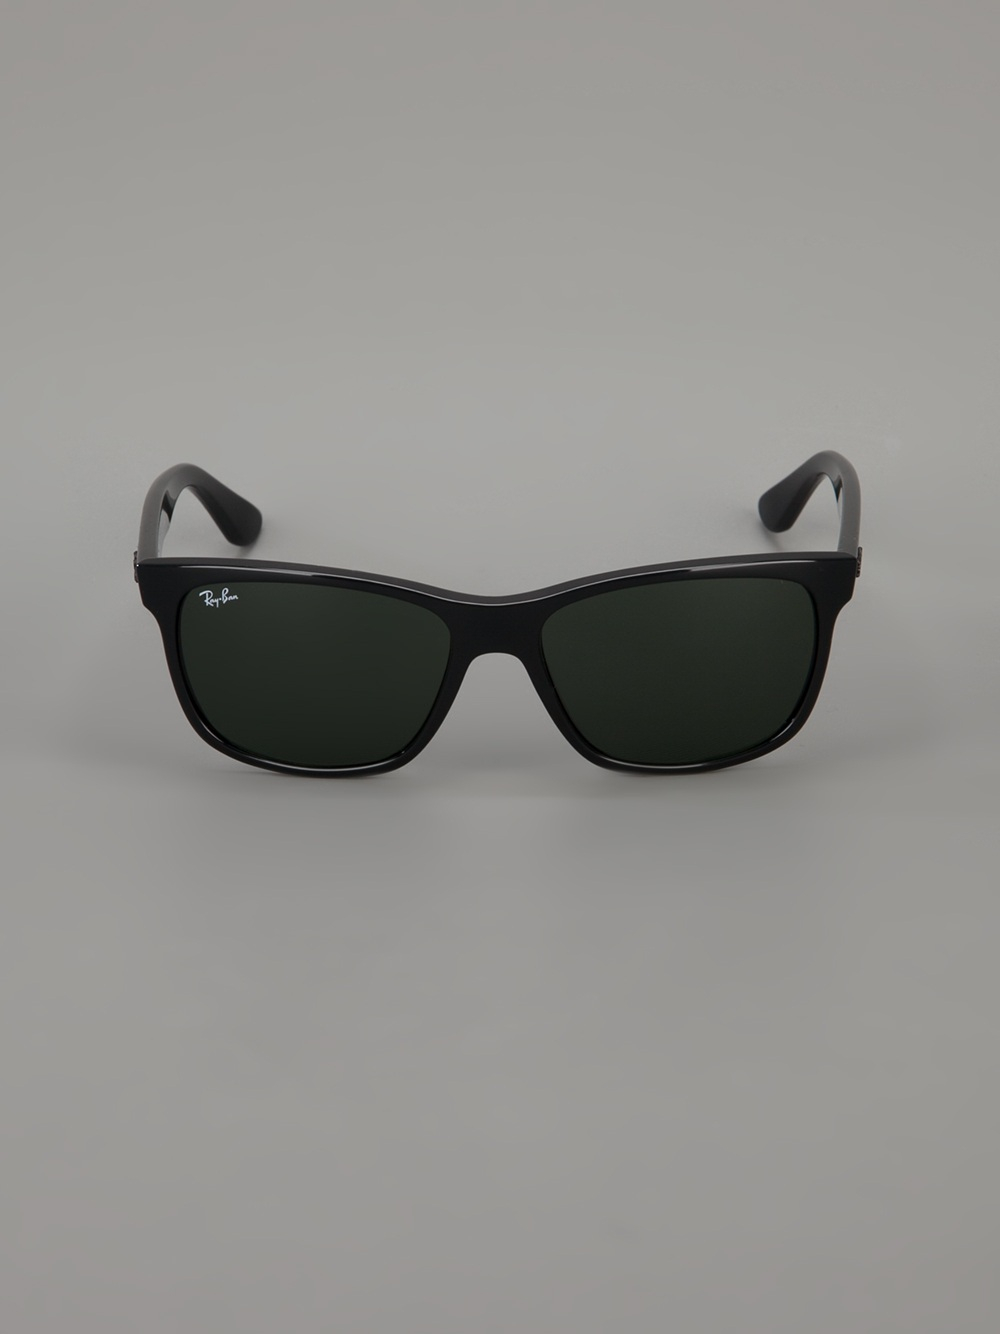 Ray-Ban Flat Top Sunglasses in Black for Men - Lyst